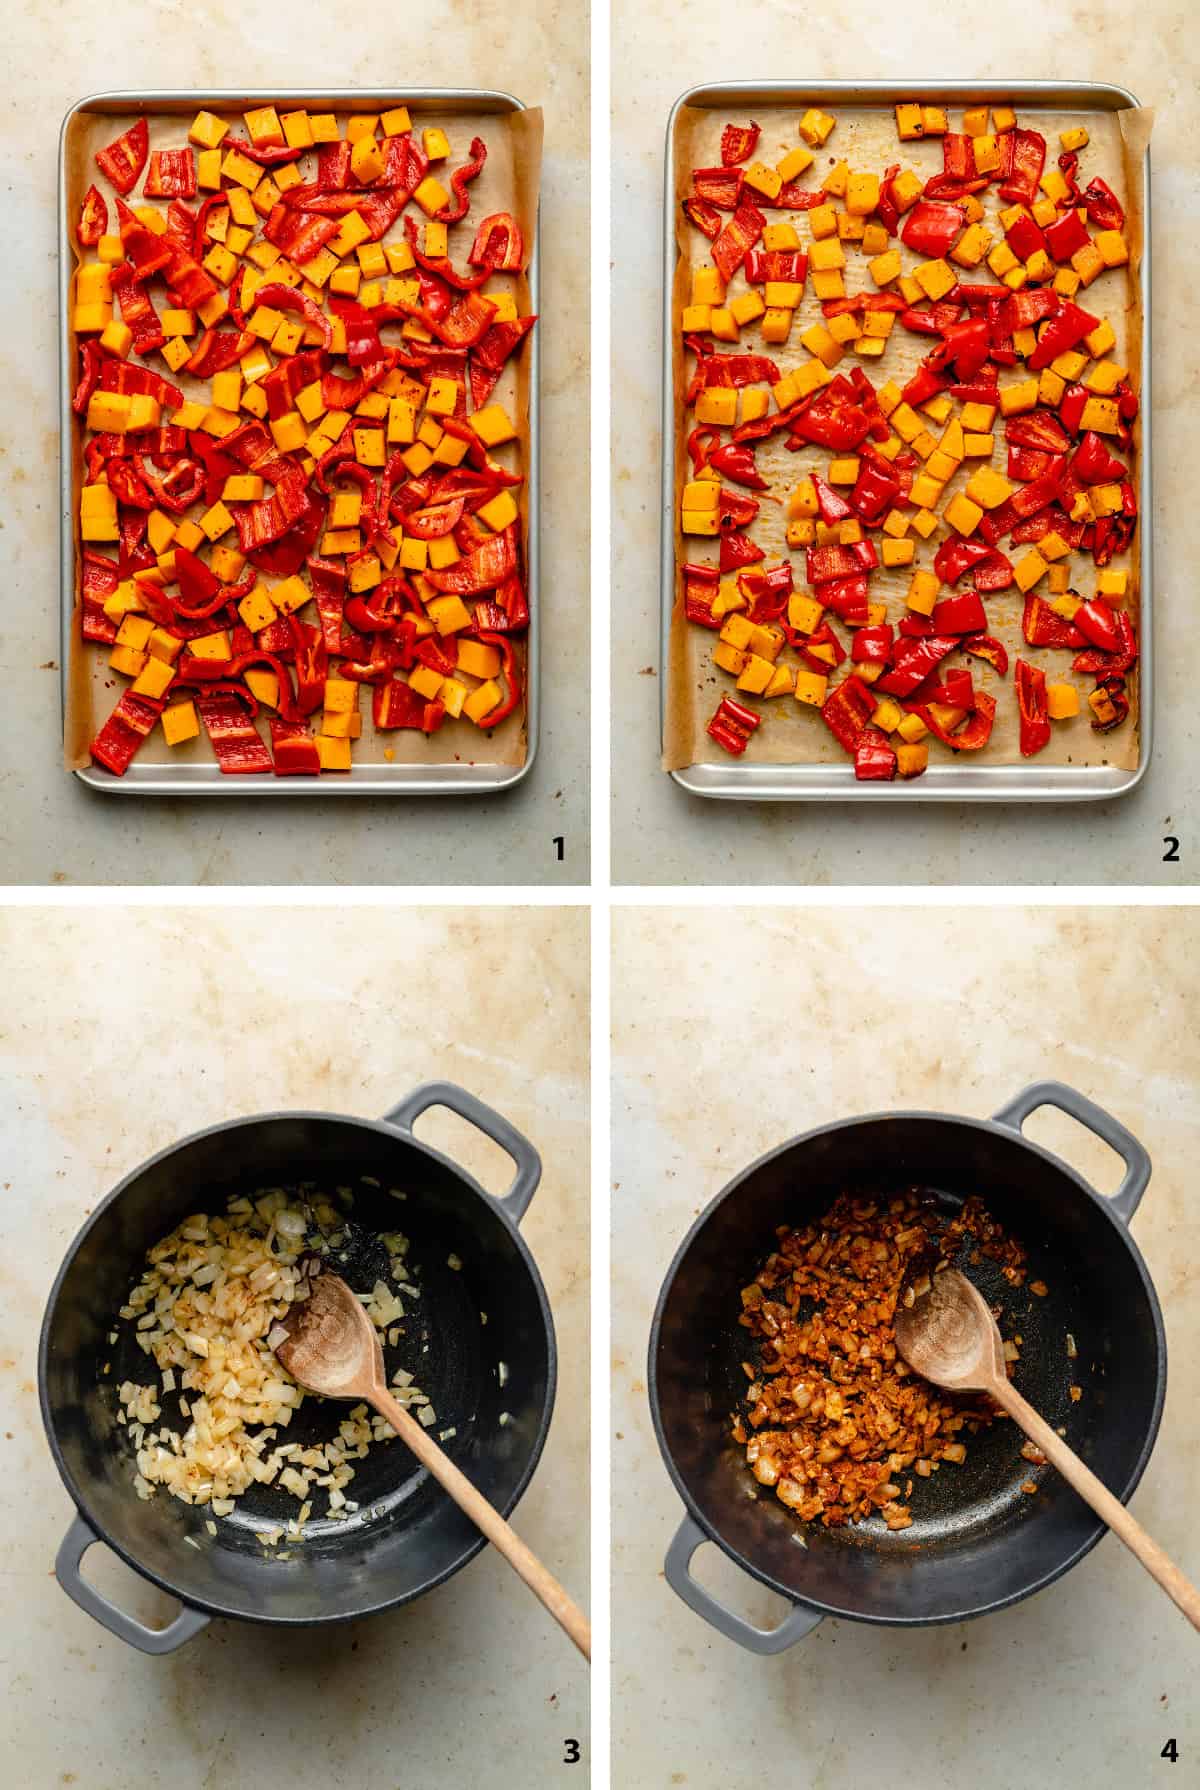 Process steps of roasting butternut squash and red peppers and sauteeing onion, garlic and spices. 